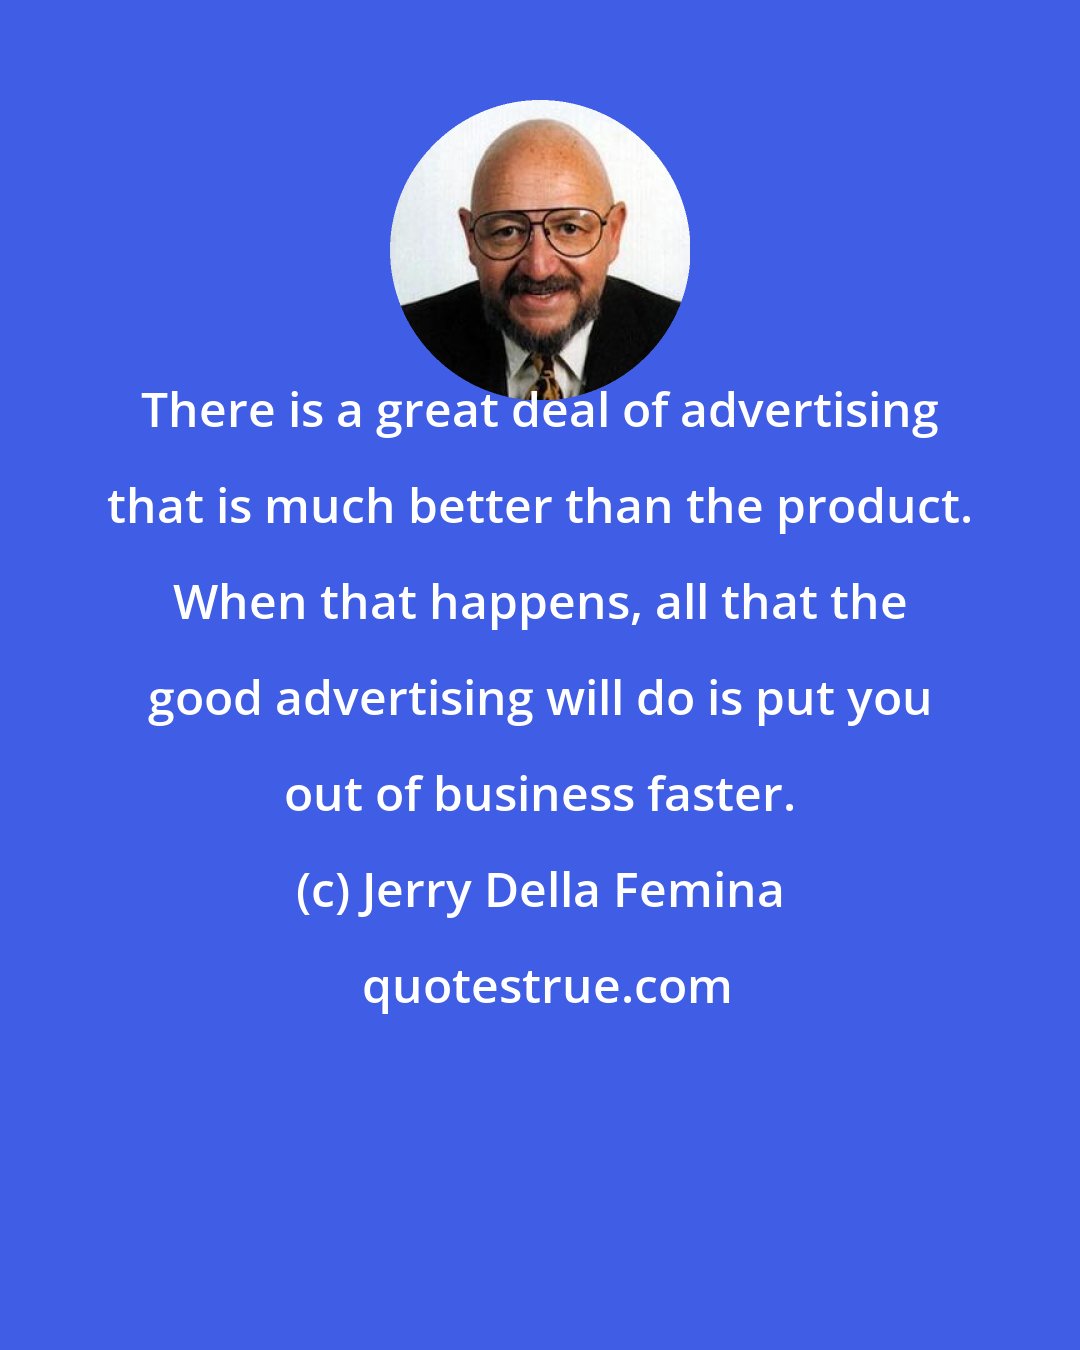 Jerry Della Femina: There is a great deal of advertising that is much better than the product. When that happens, all that the good advertising will do is put you out of business faster.